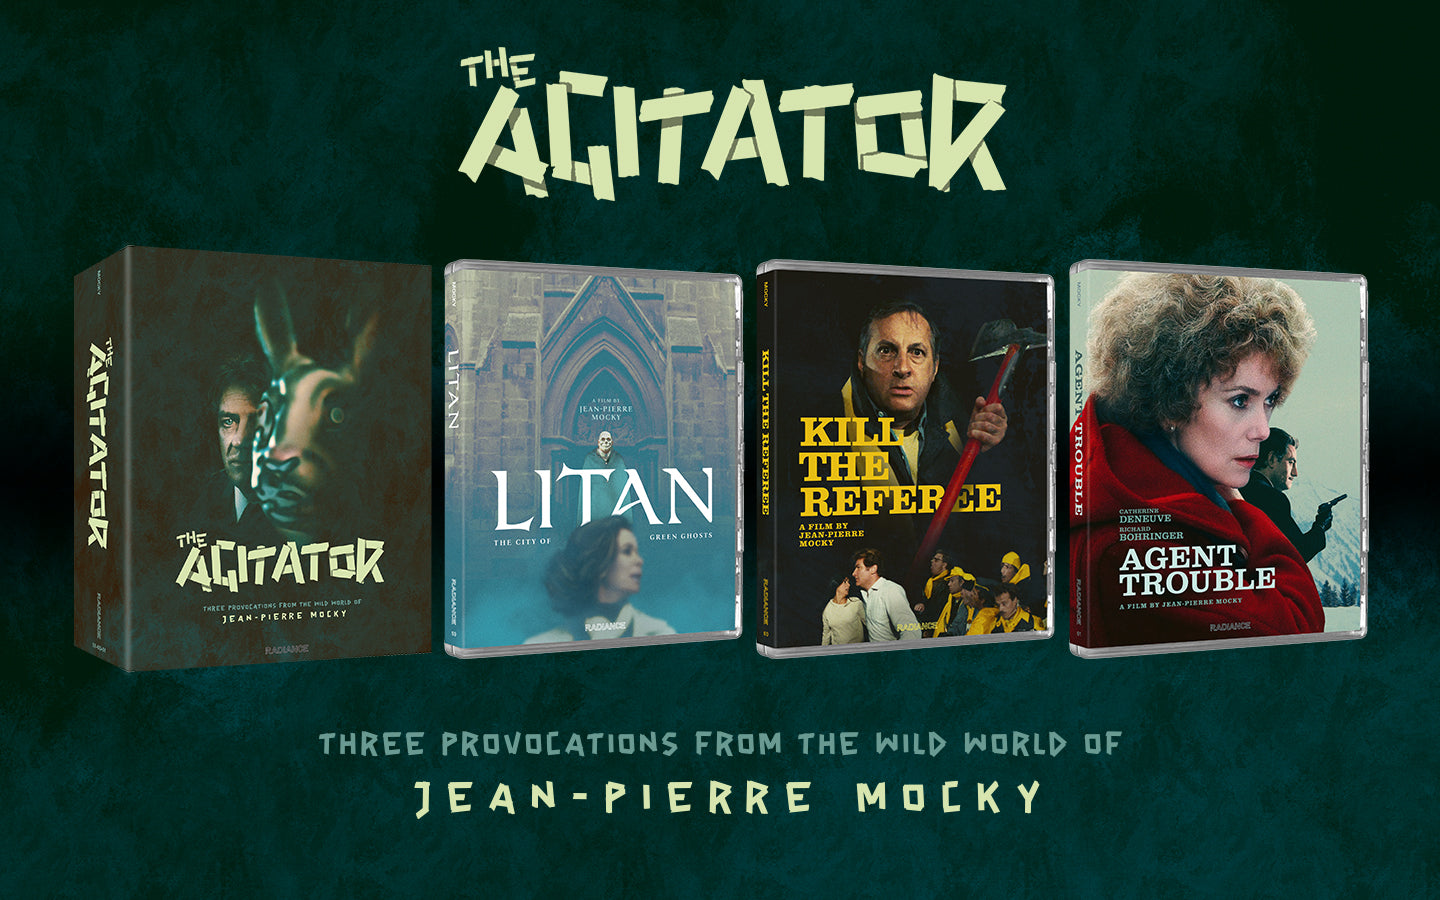 The Agitator: Three Provocations from the Wild World of Jean-Pierre Mocky (LE)